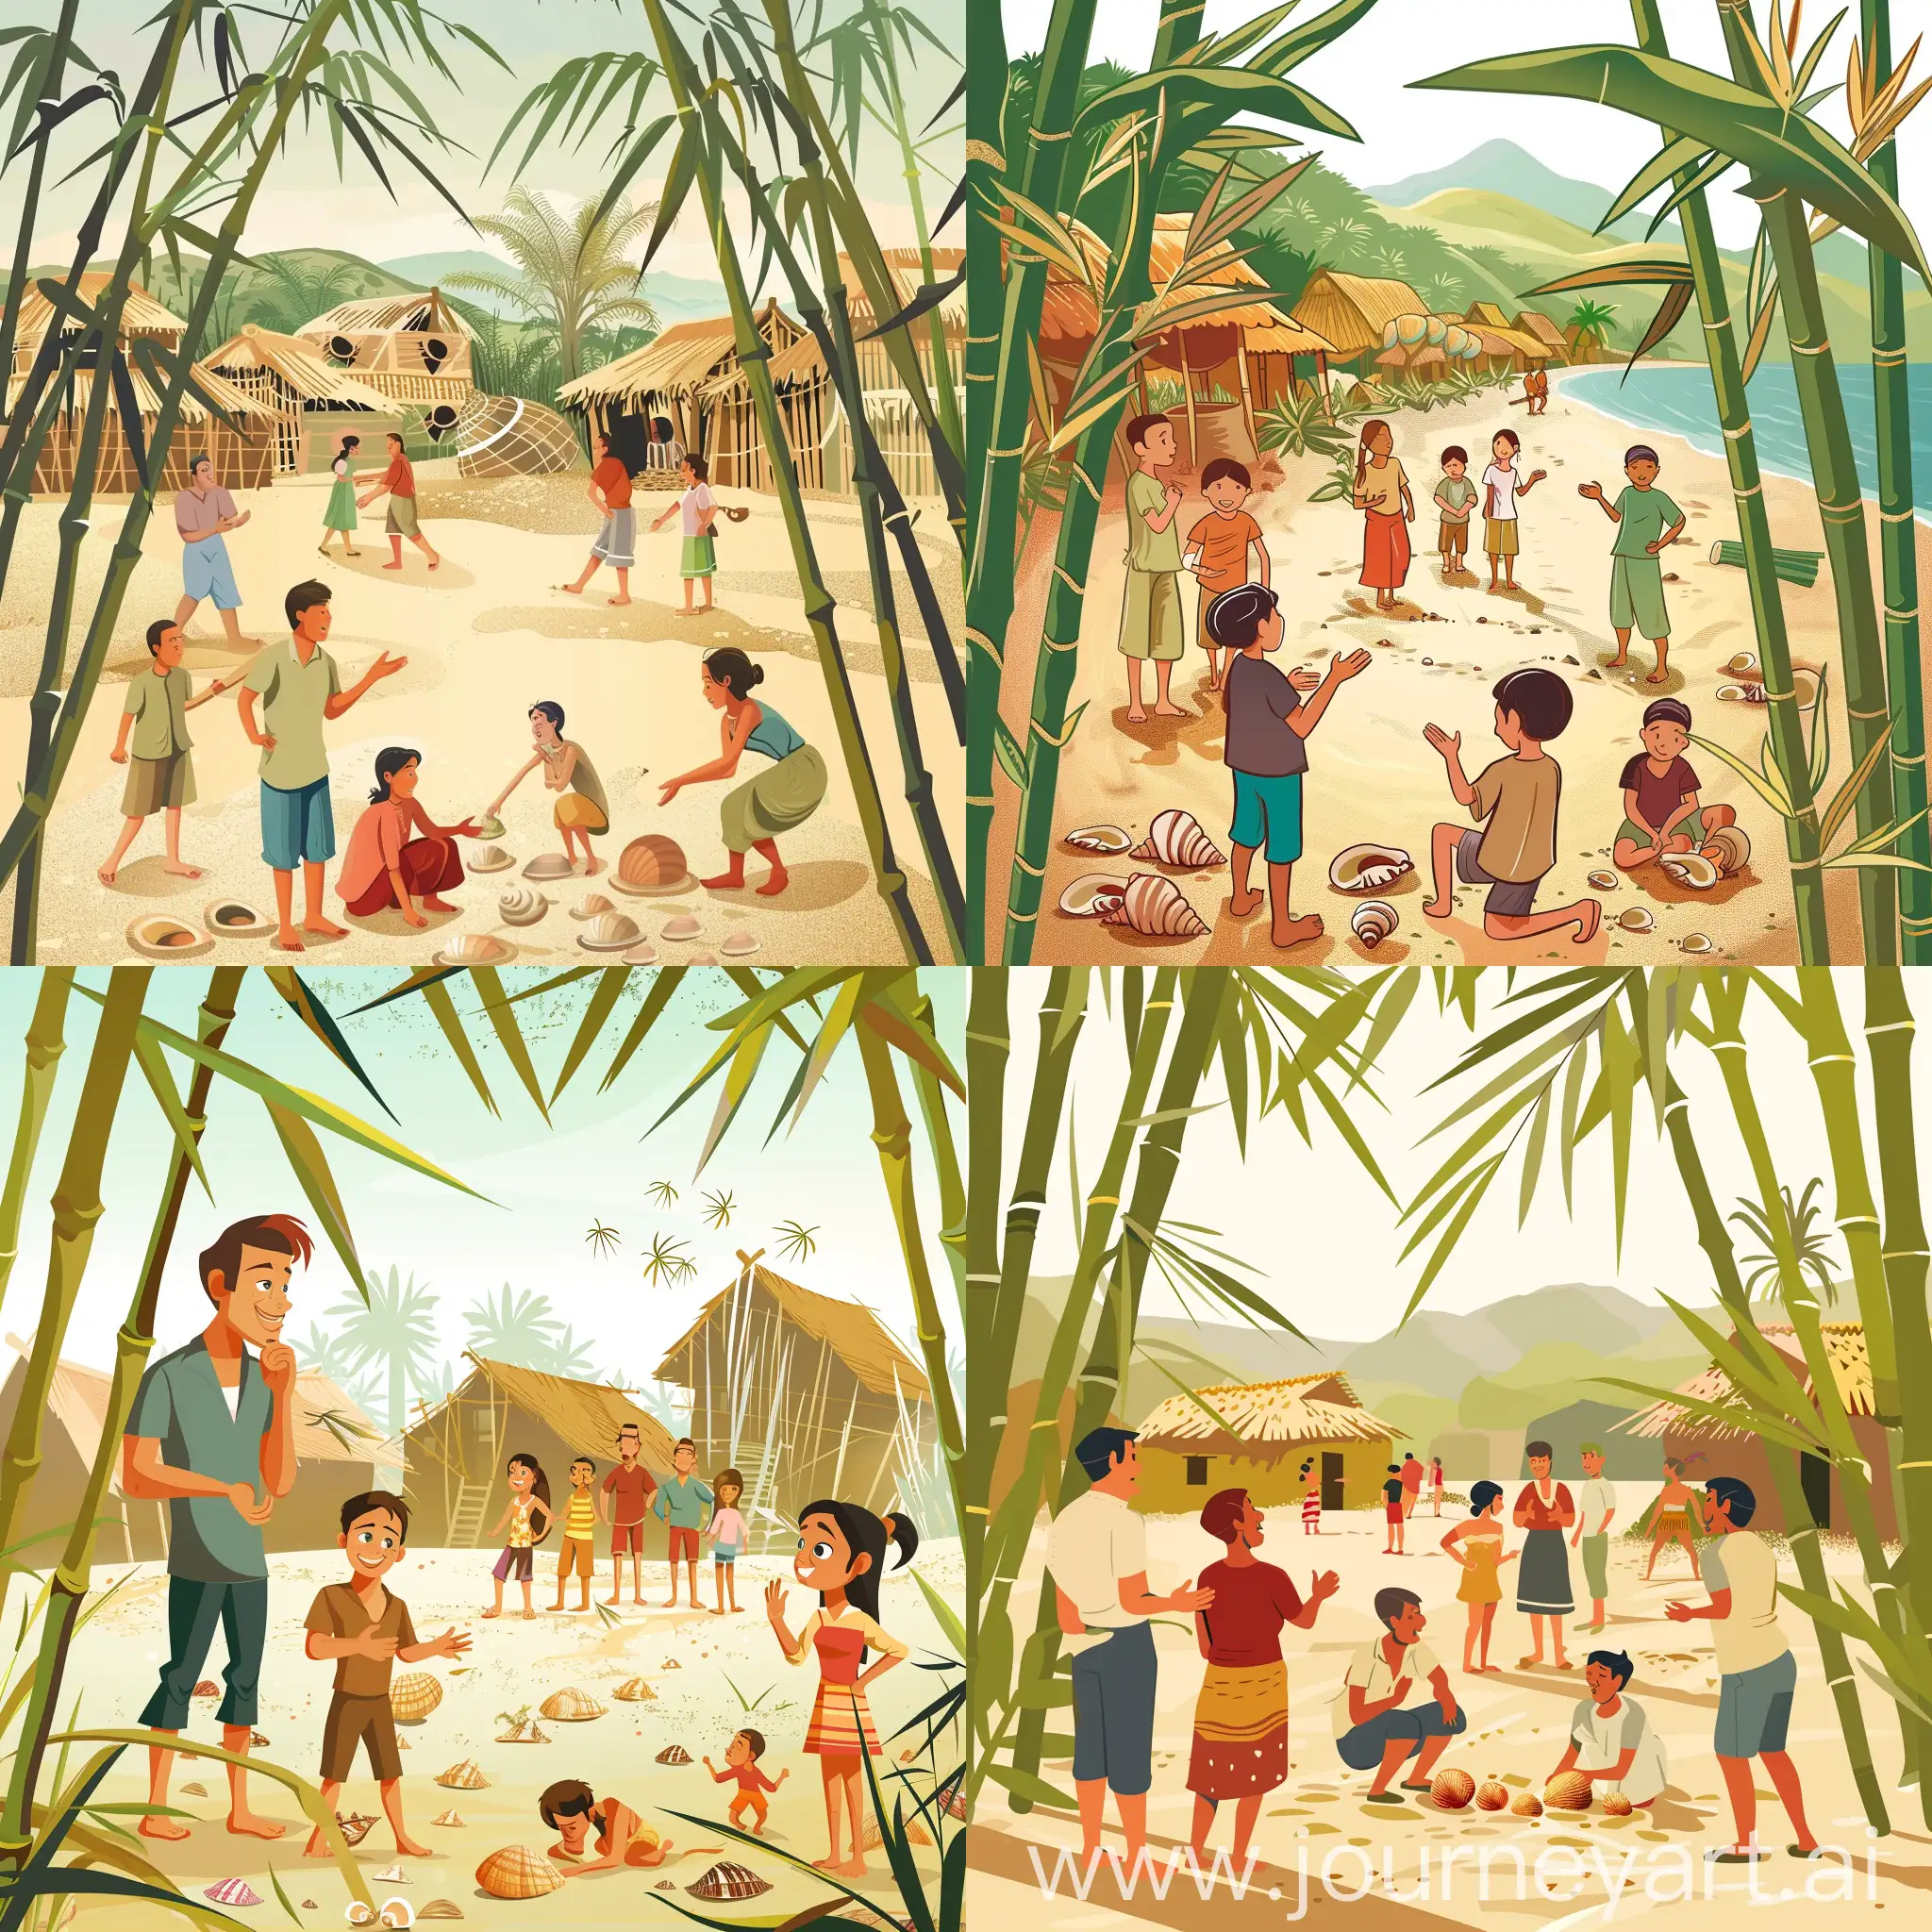 Village-Conversation-and-Beach-Shell-Hunting-Scene